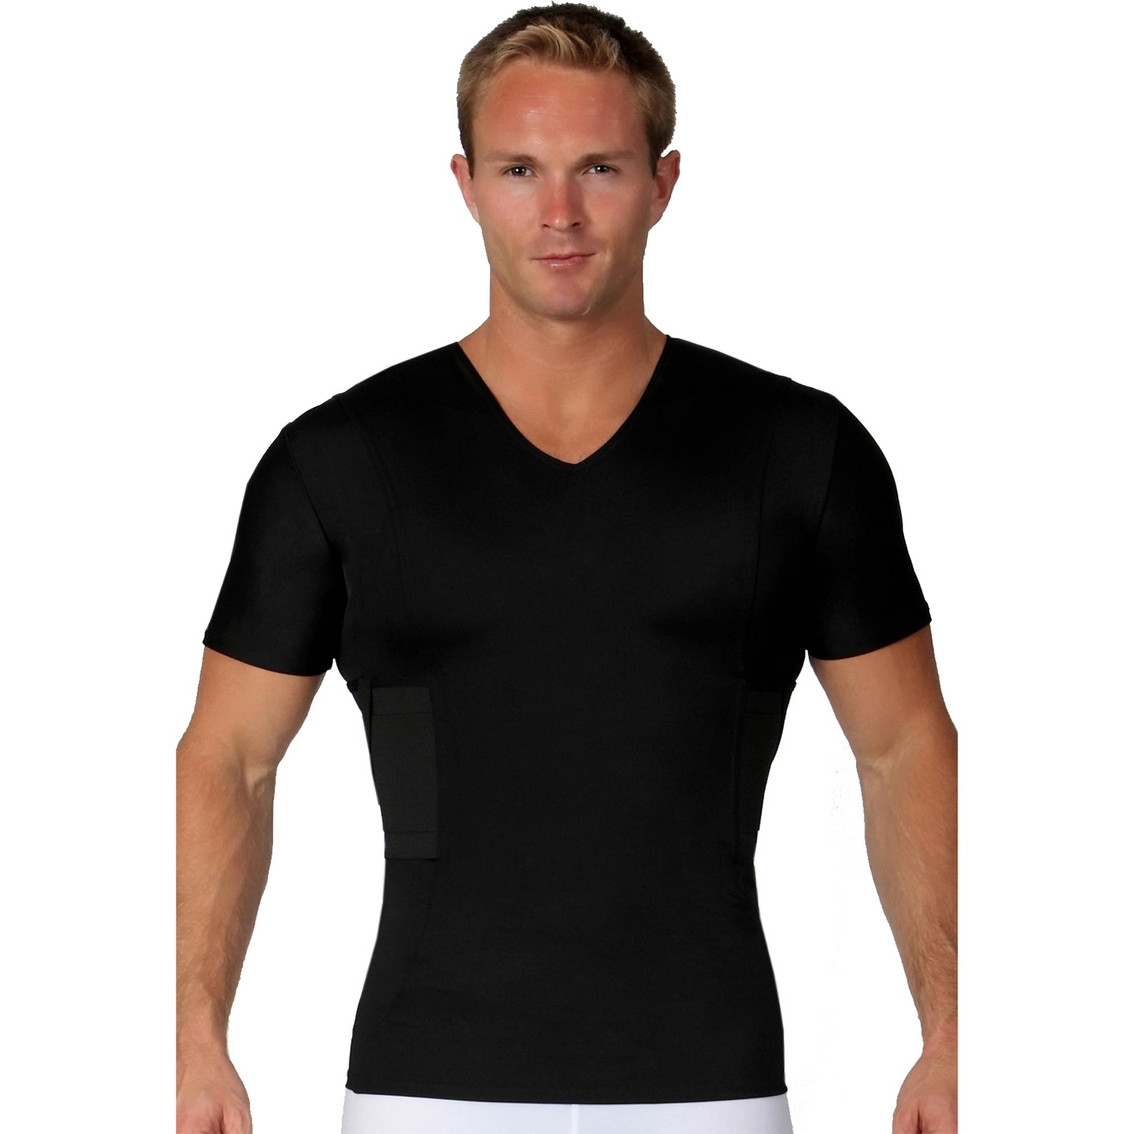 Ispro Tactical Concealed Carry V Neck Shirt | Shirts & Tops | Military ...